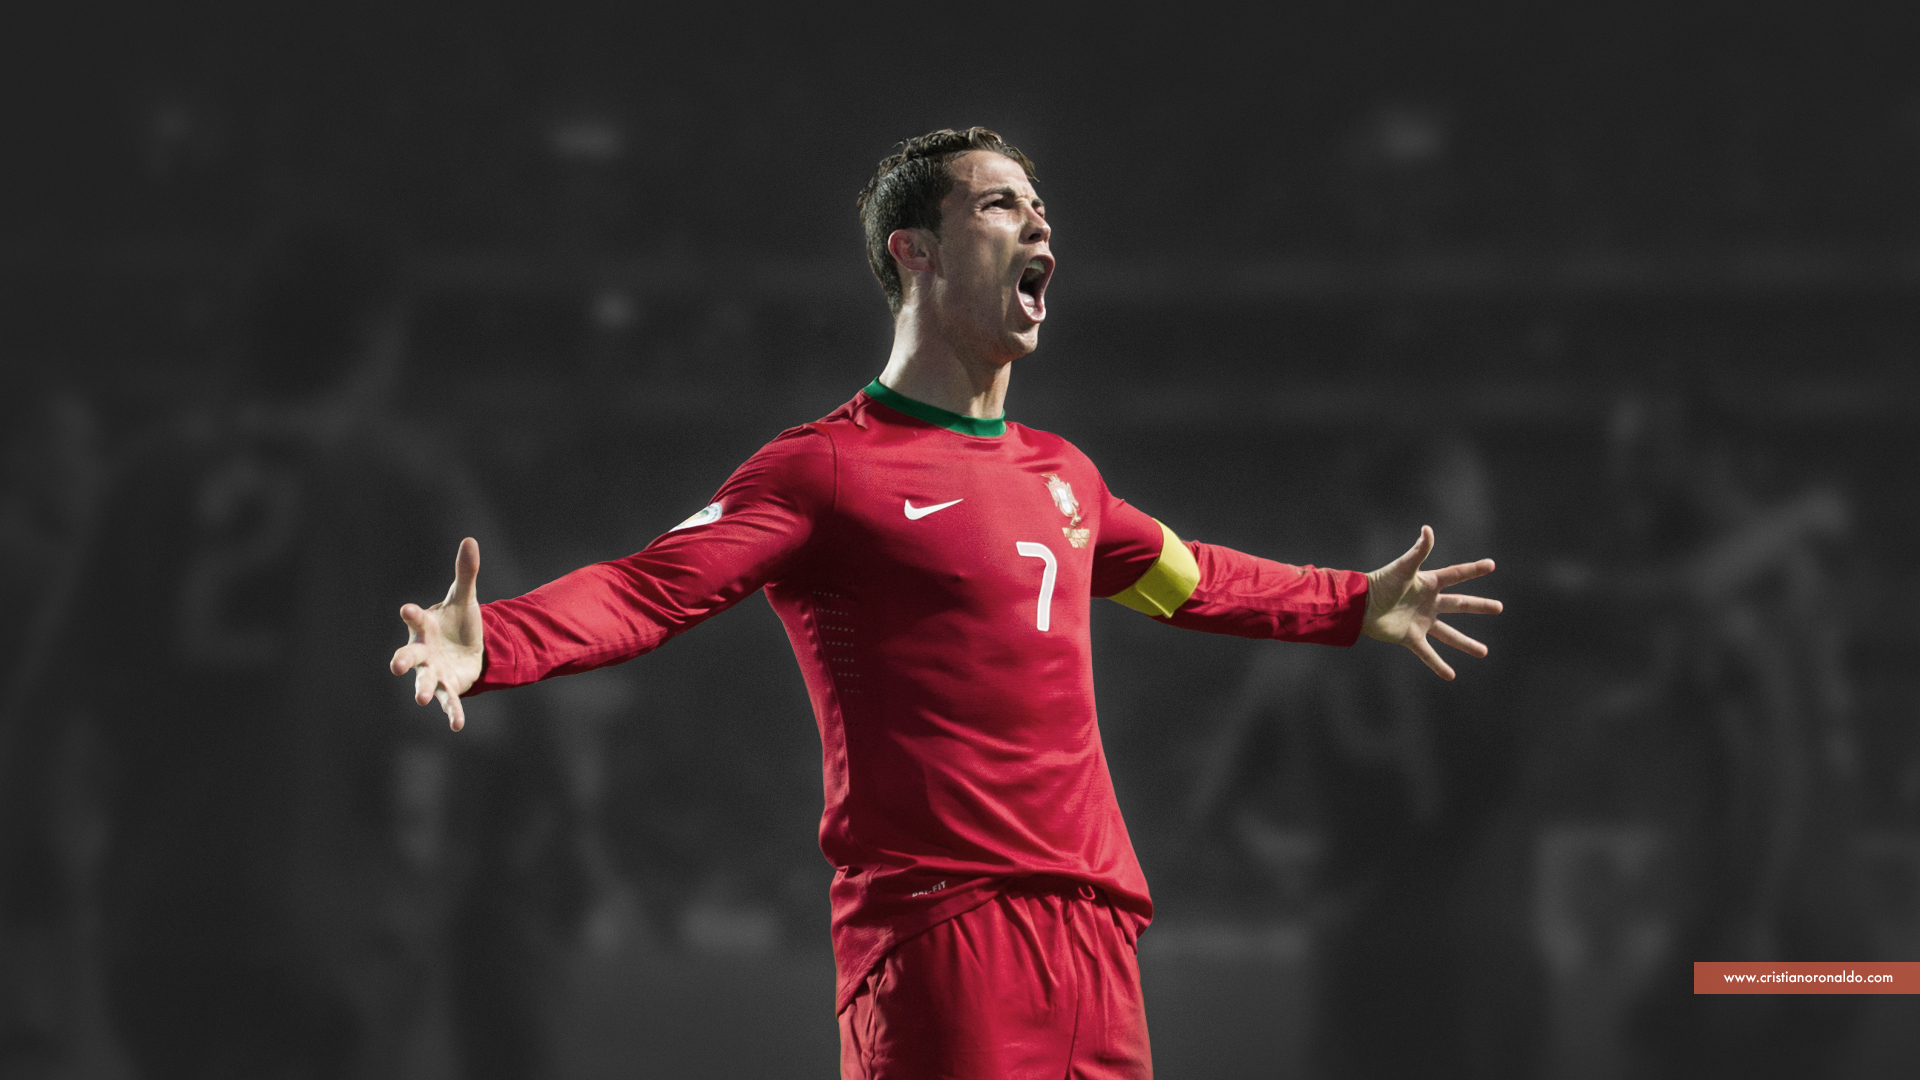 cr7 wallpaper download,football player,player,soccer player,sports equipment,championship